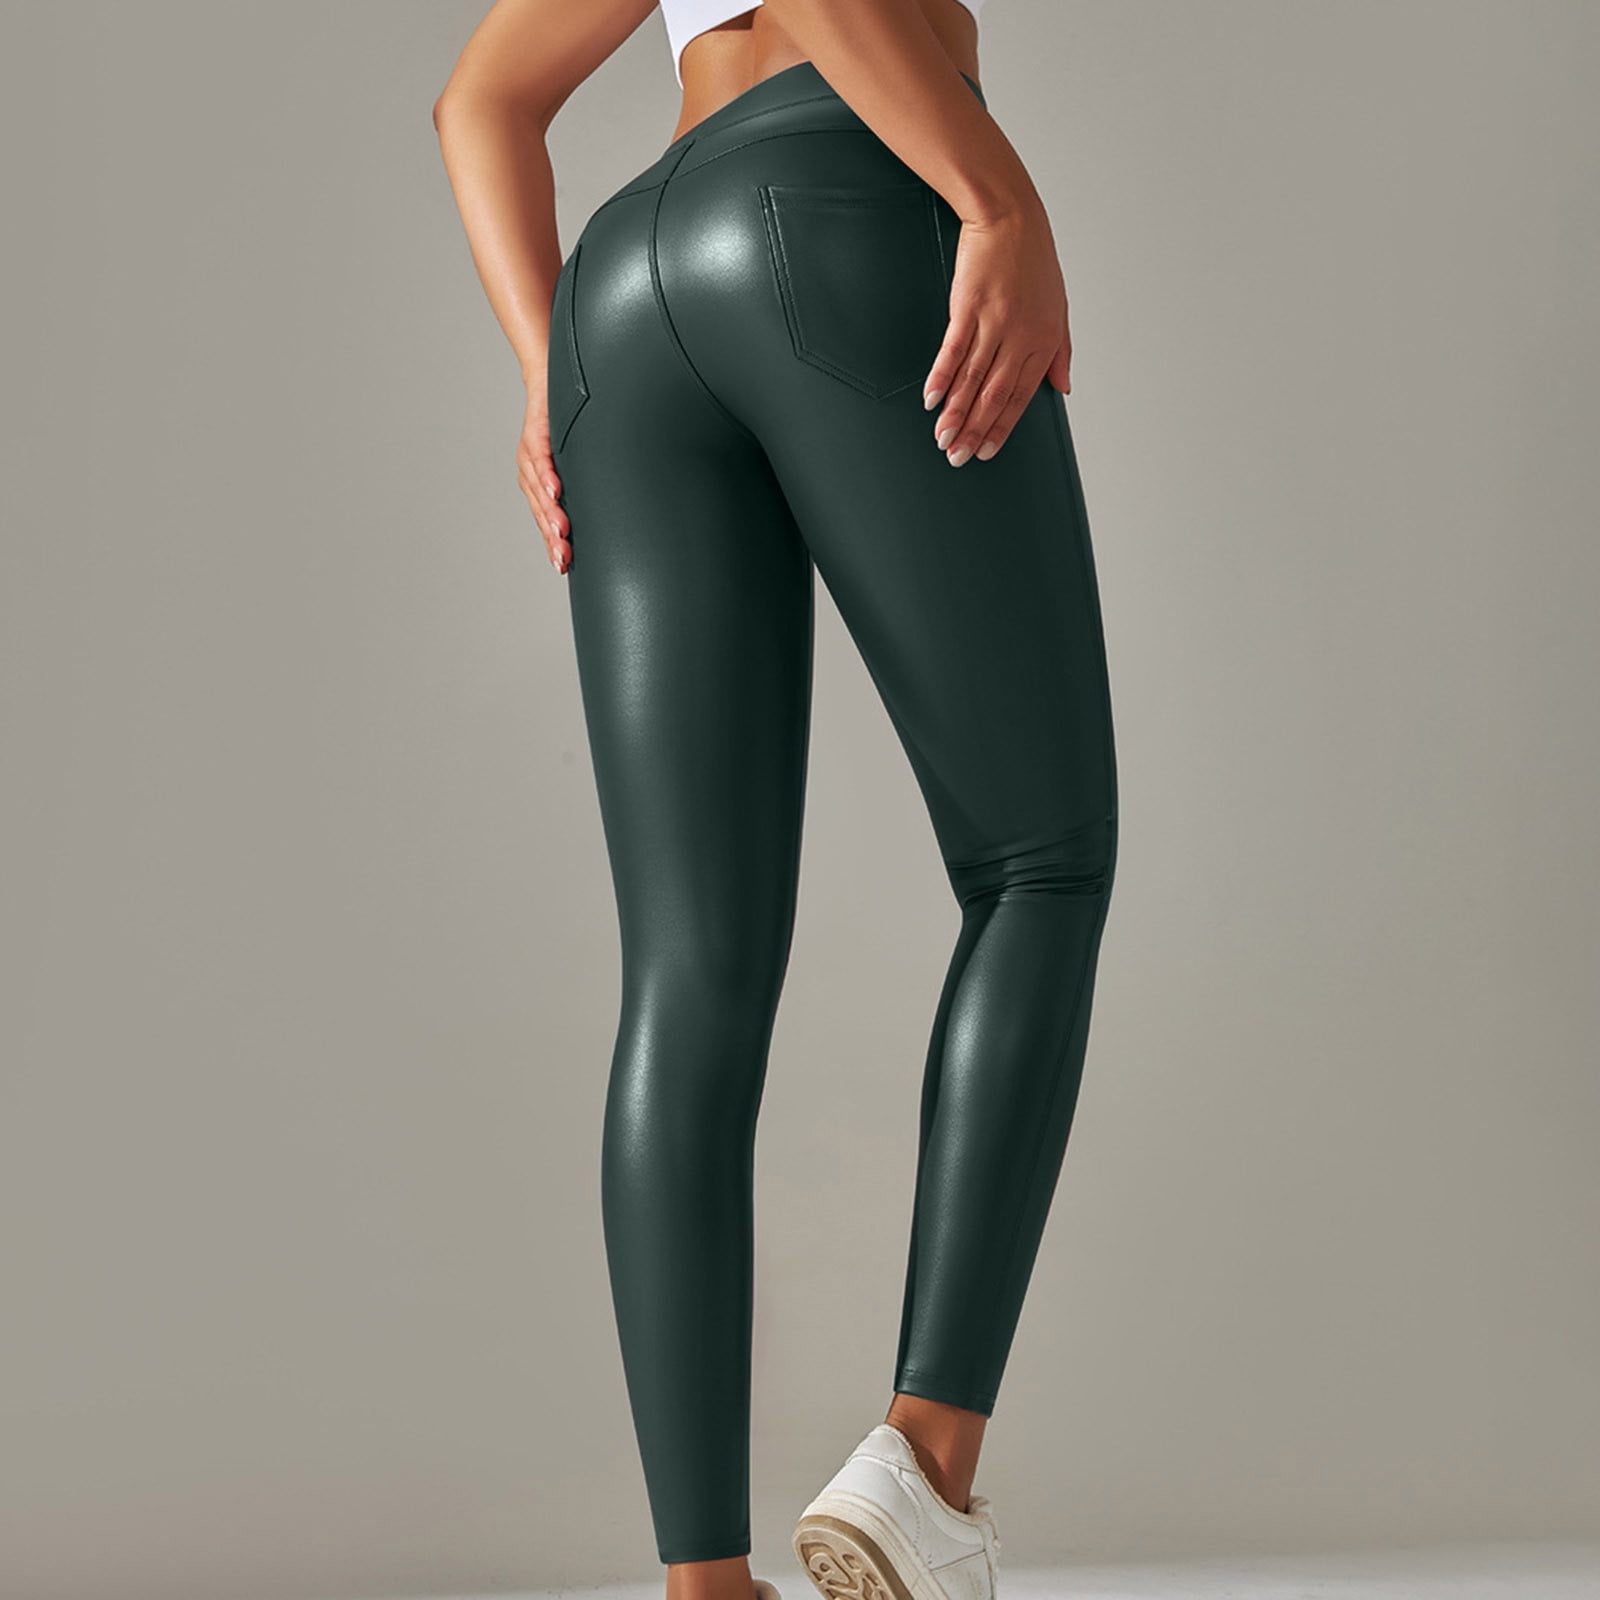 Seamless Butt Lifting Workout Leggings for Women Bright Leather